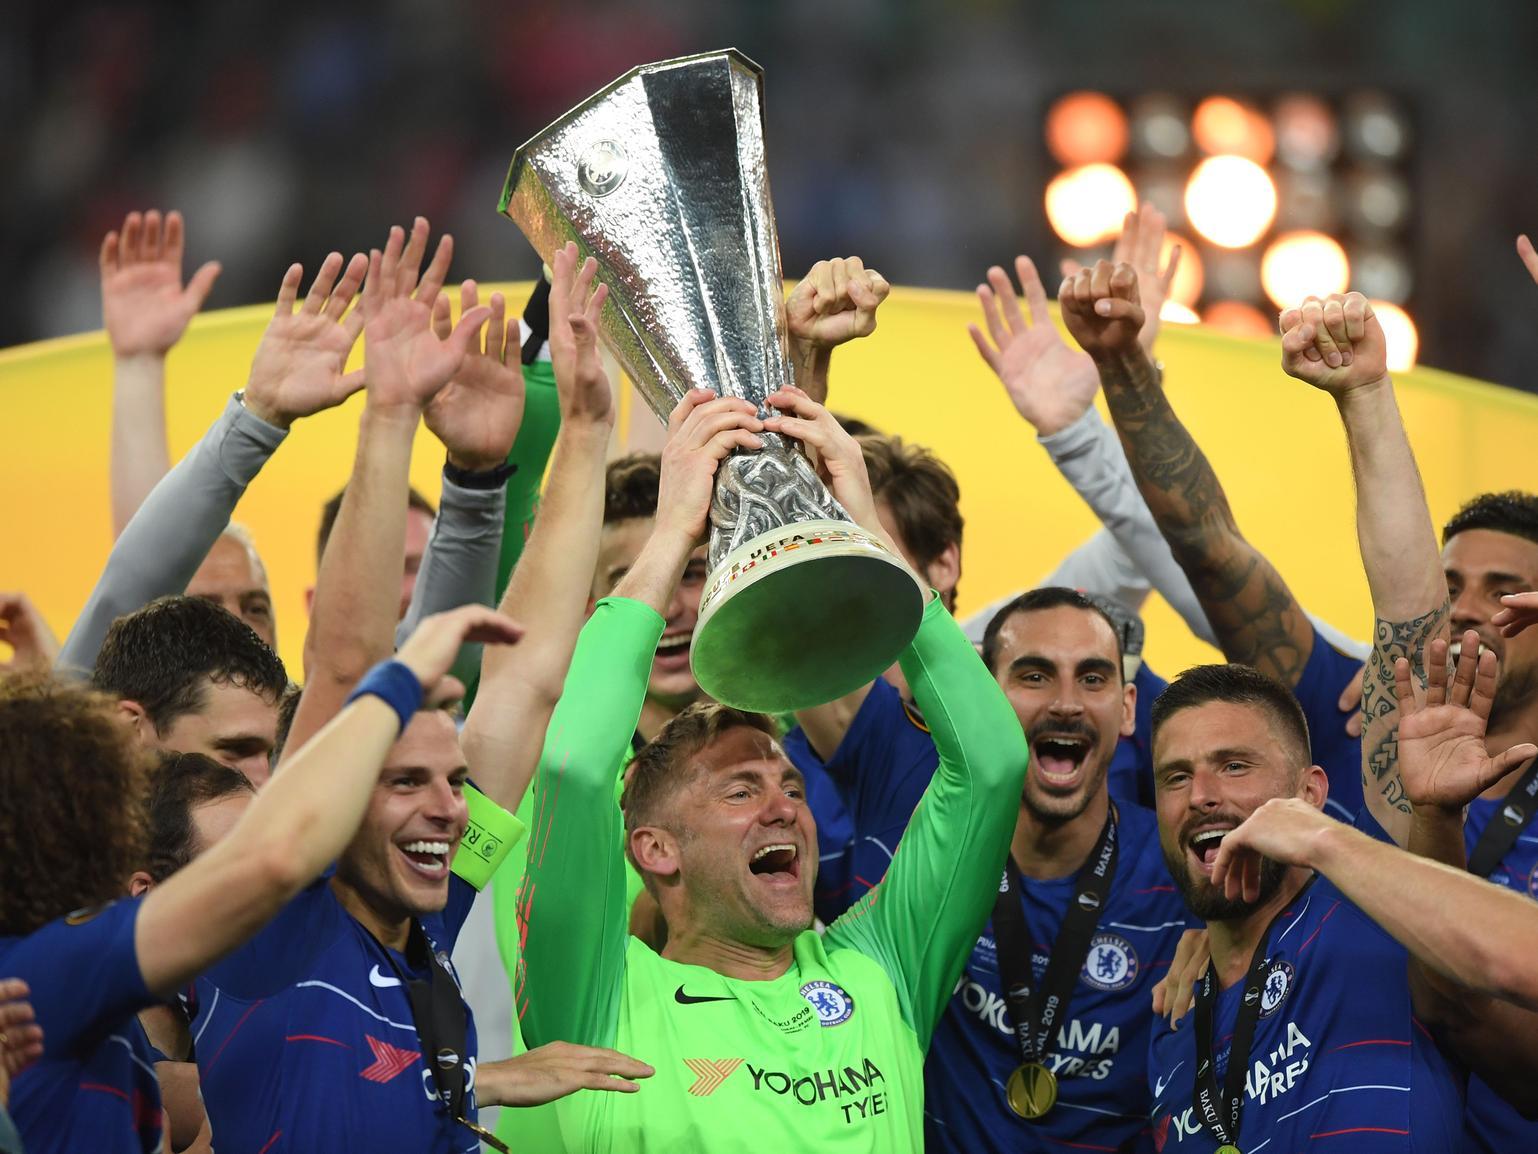 Ex-Leeds United defender Danny Mills has claimed that the club could look to snap up free agent goalkeeper Rob Green on a free agent deal, if they require cover for Kiko Casilla in the coming weeks. (Football Insider)